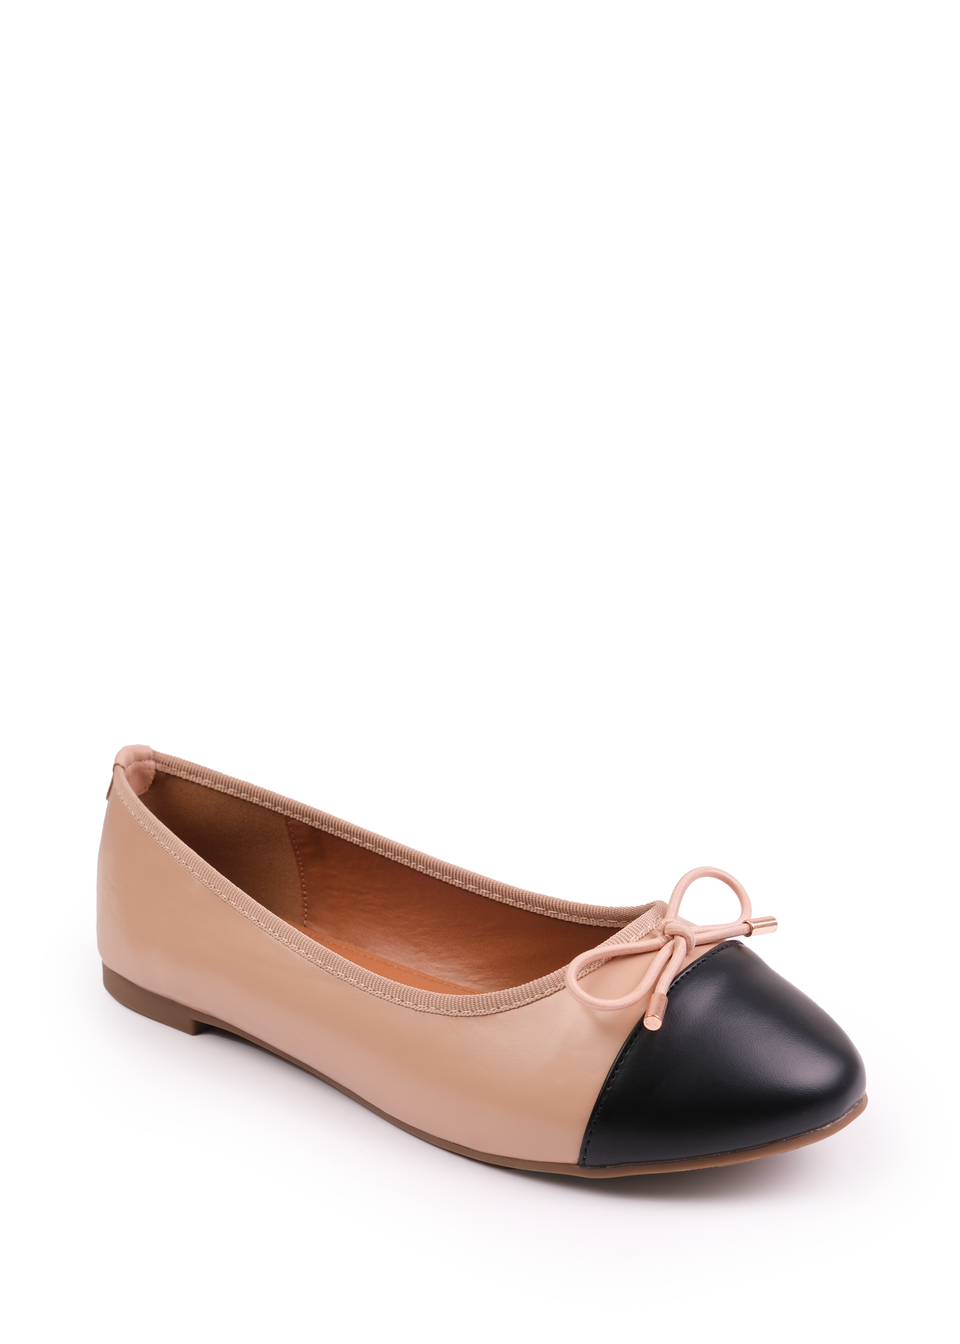 Where's That From Cream Janice Extra Wide PU Ballerina Flats